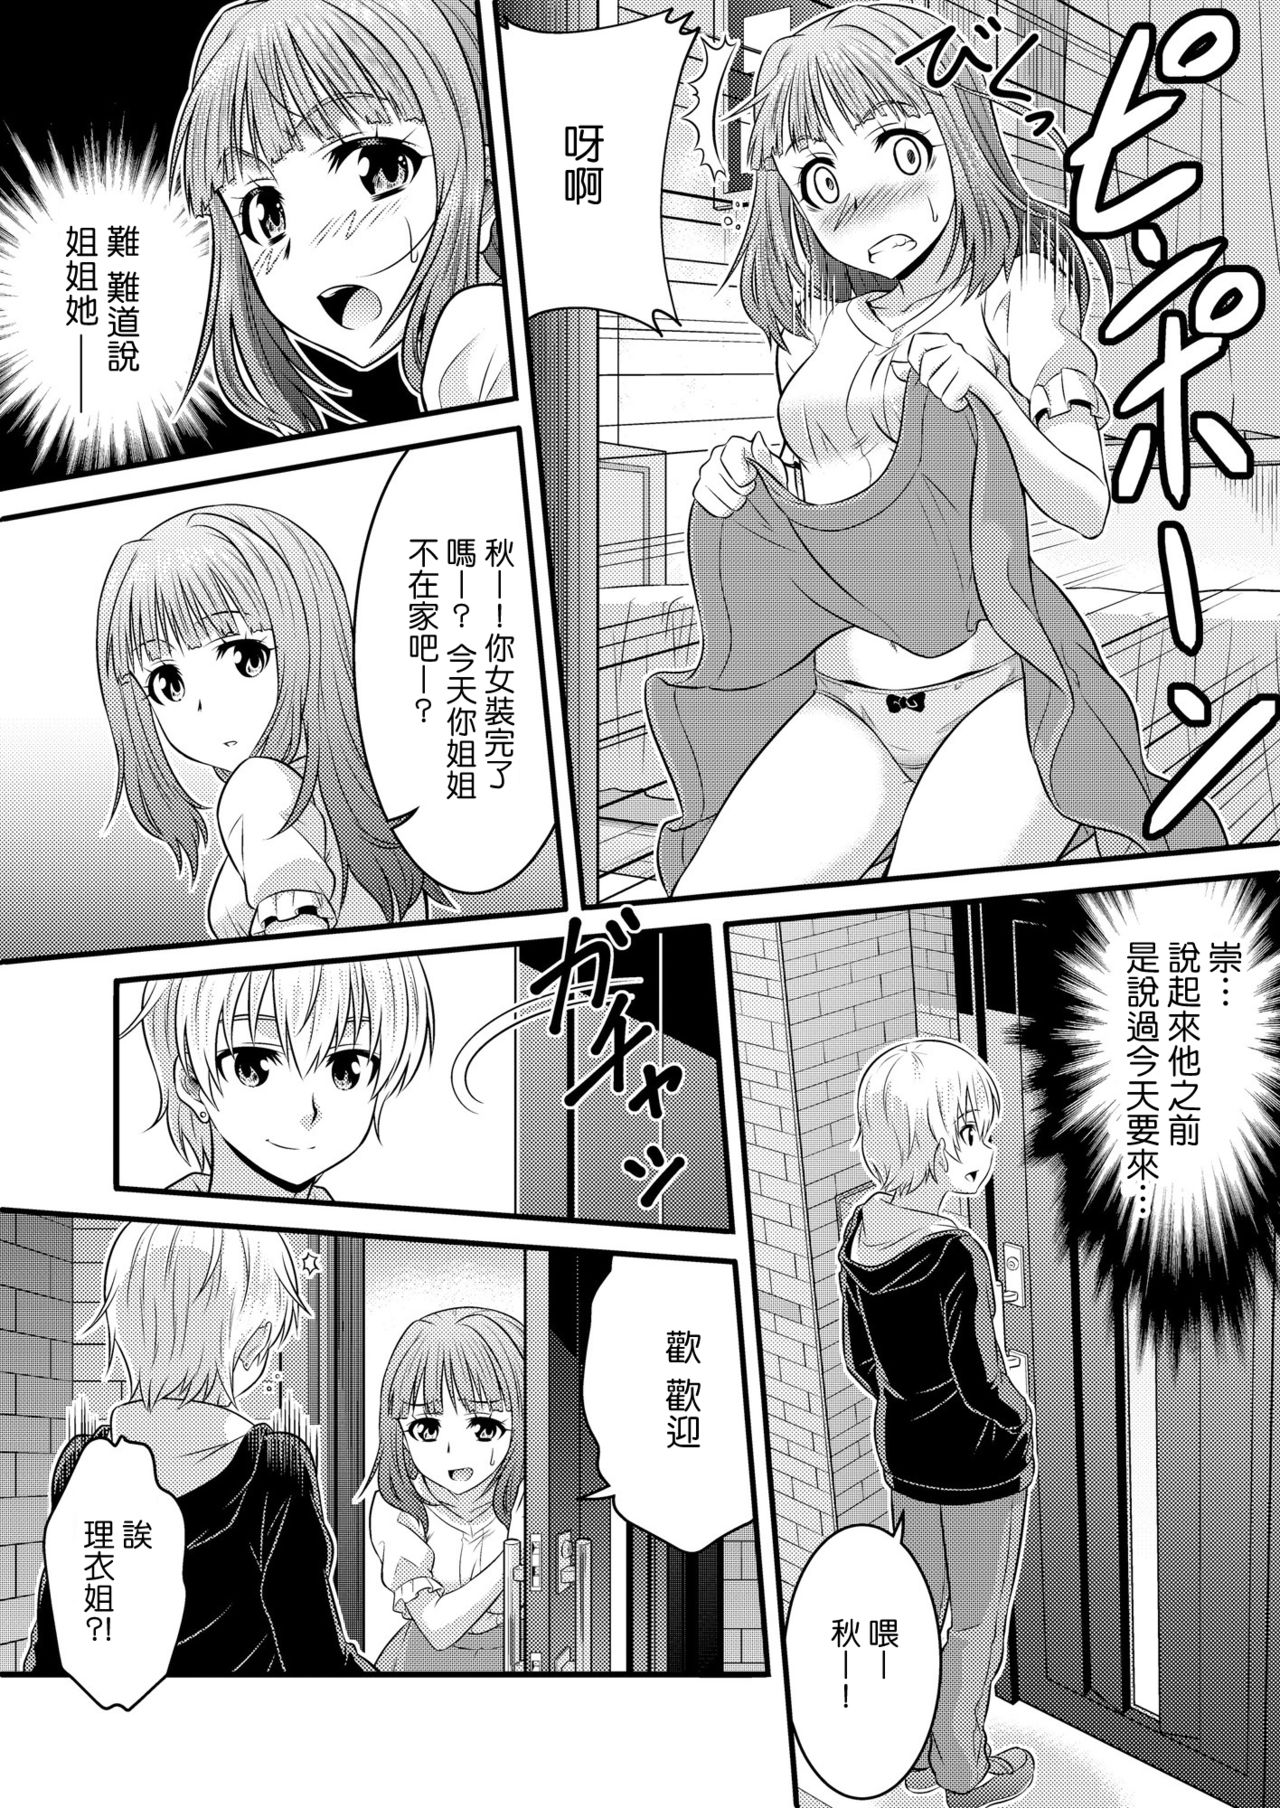 Metamorph ★ Coordination - I Become Whatever Girl I Crossdress As~ [Sister Arc, Classmate Arc] [Chinese] [瑞树汉化组] page 9 full